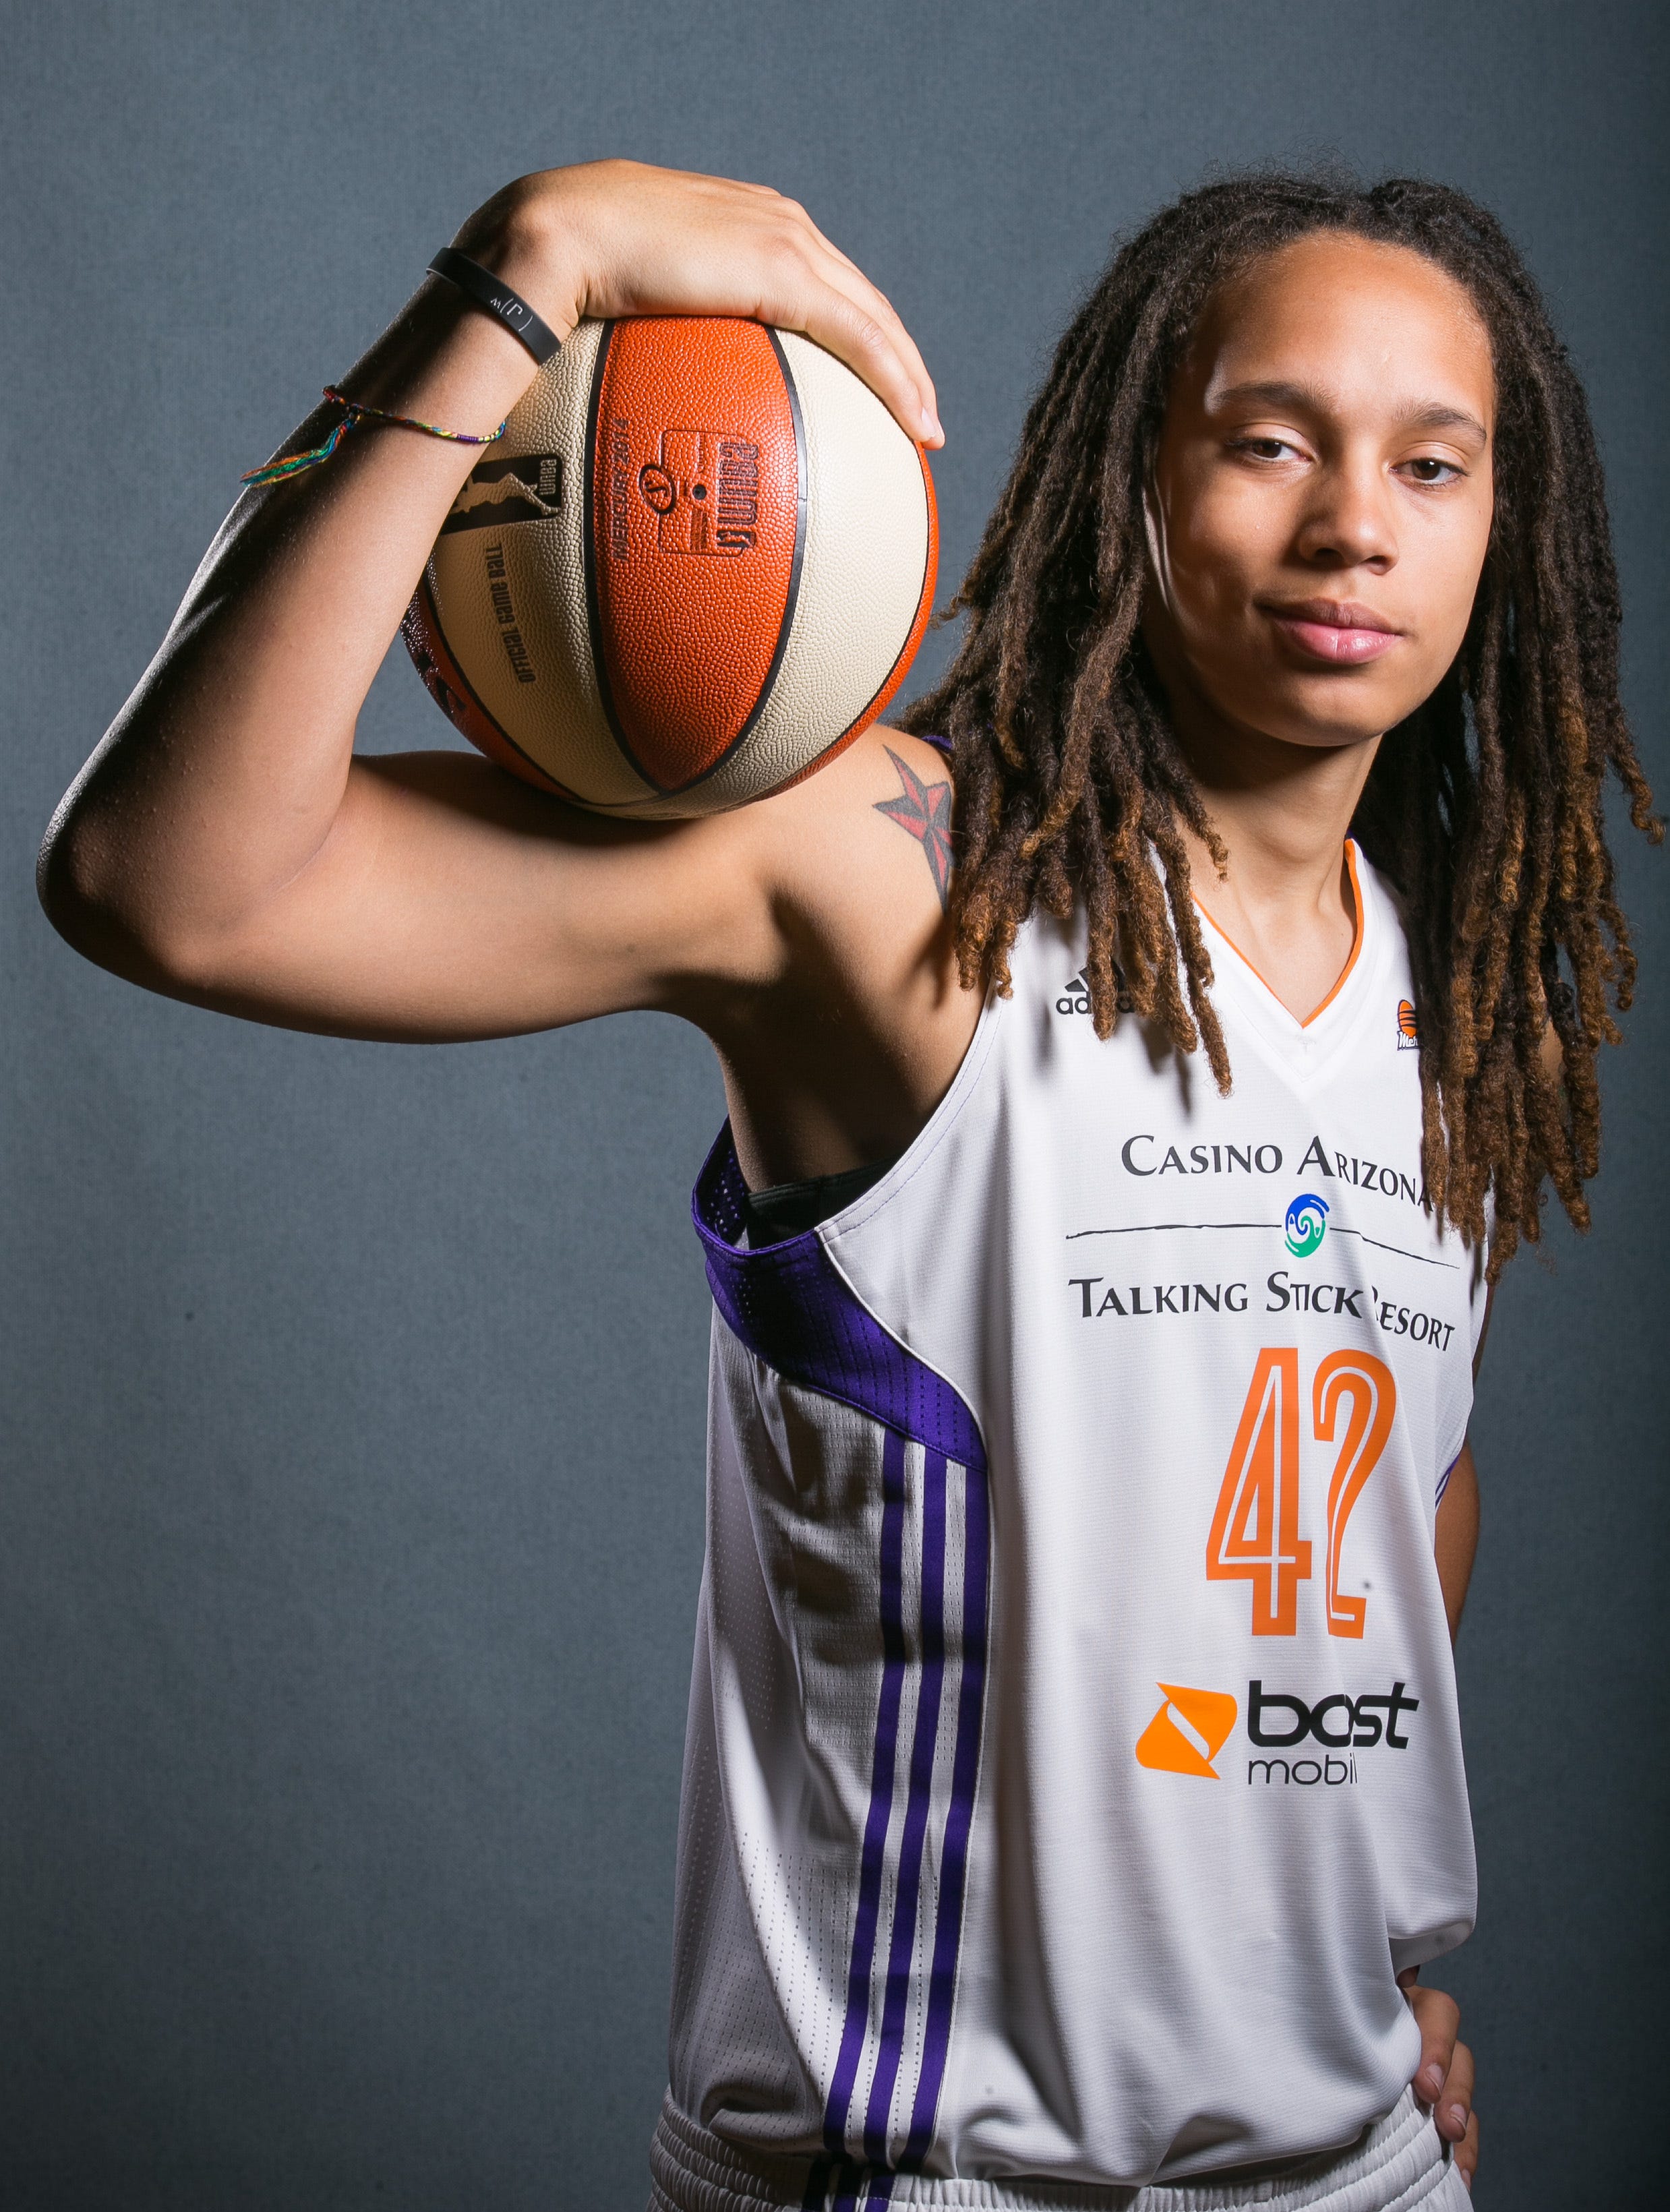 Newly engaged BRITTNEY GRINER takes control of her life